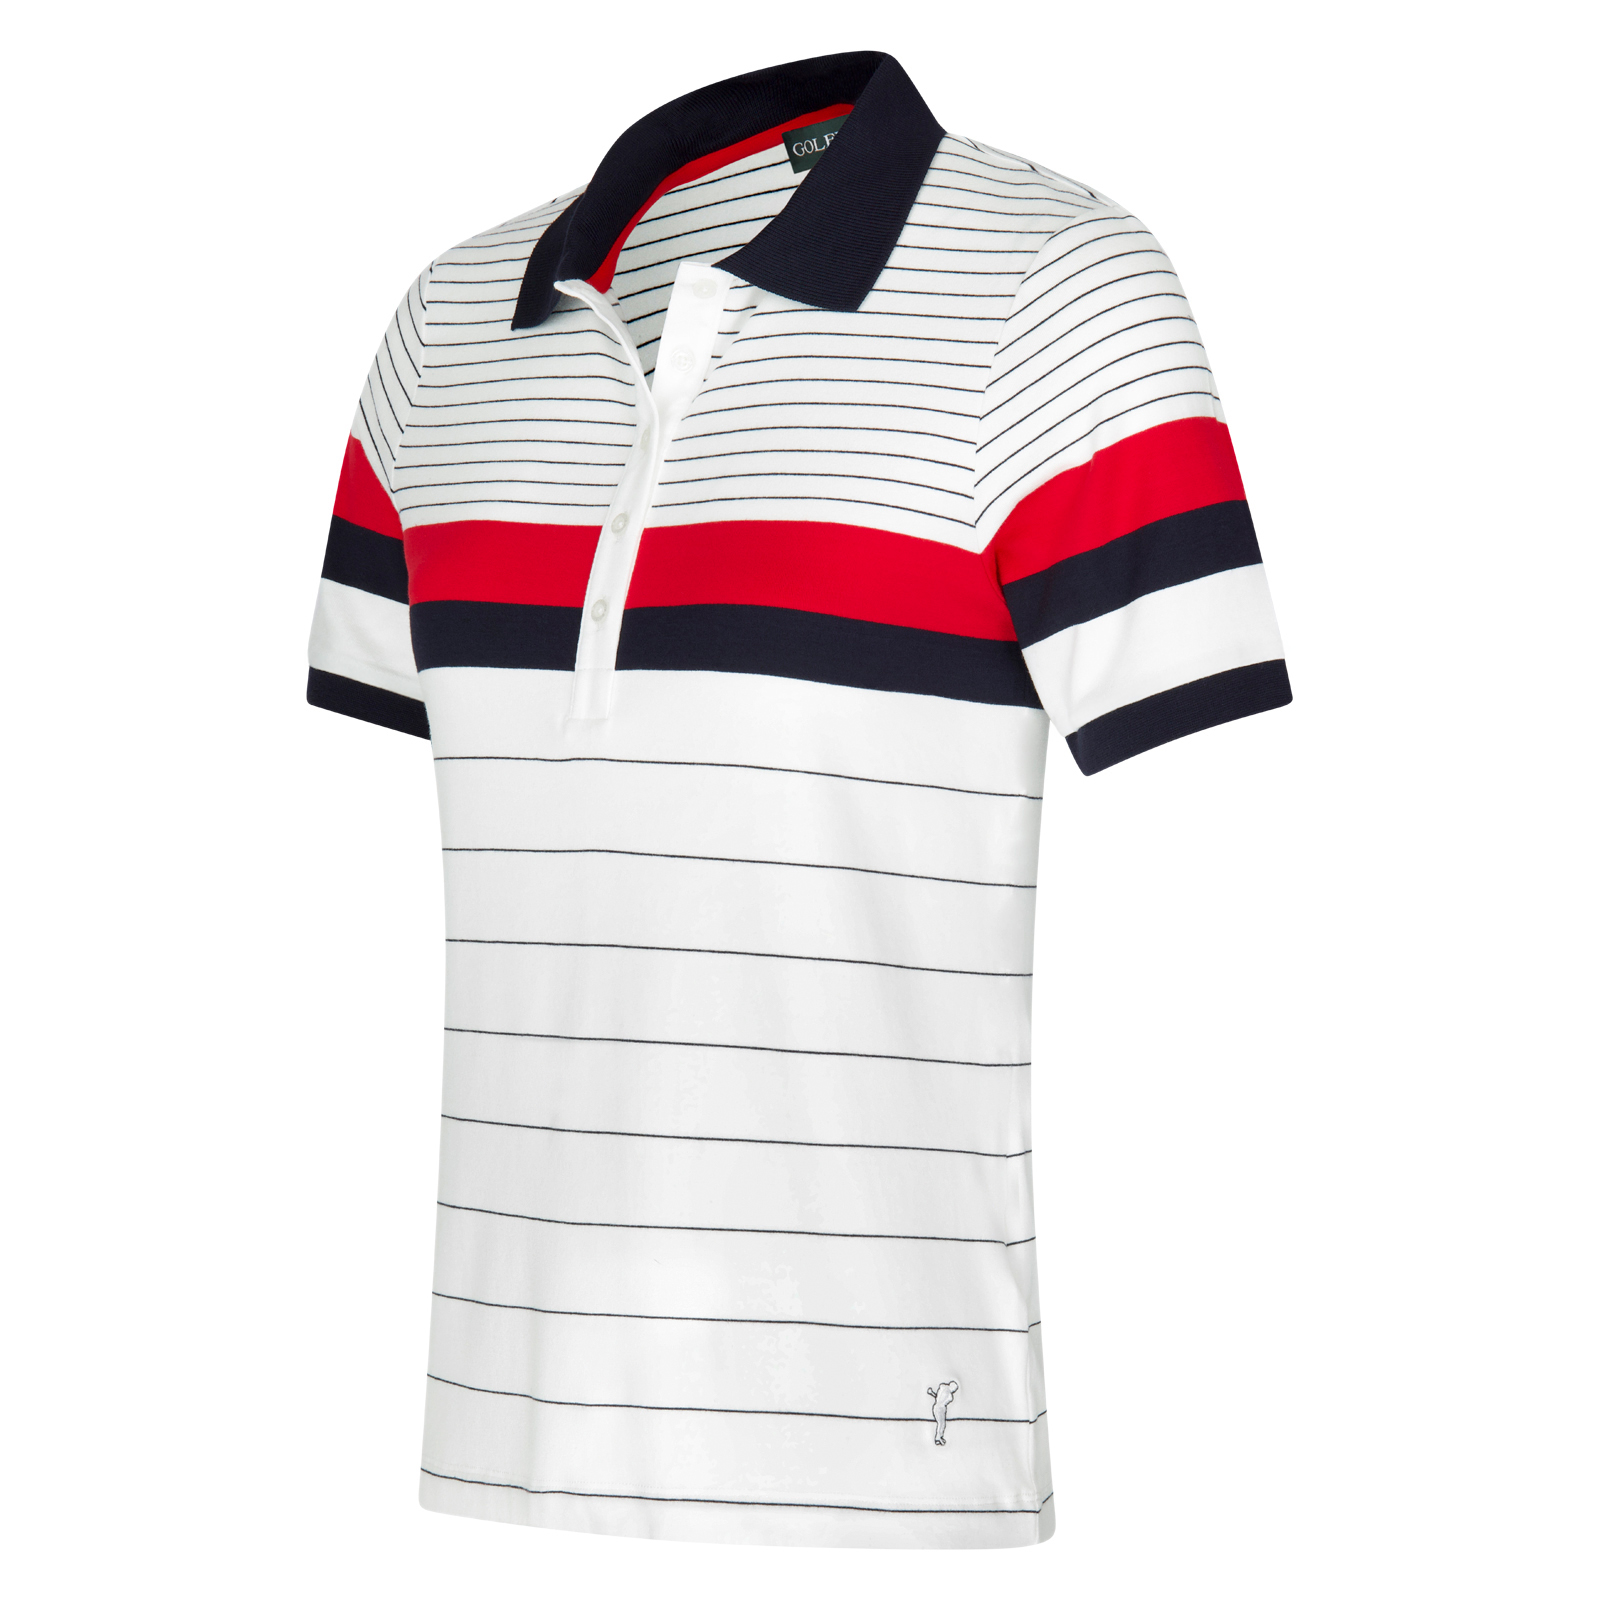 Ladies' striped golf polo shirt in stretch viscose